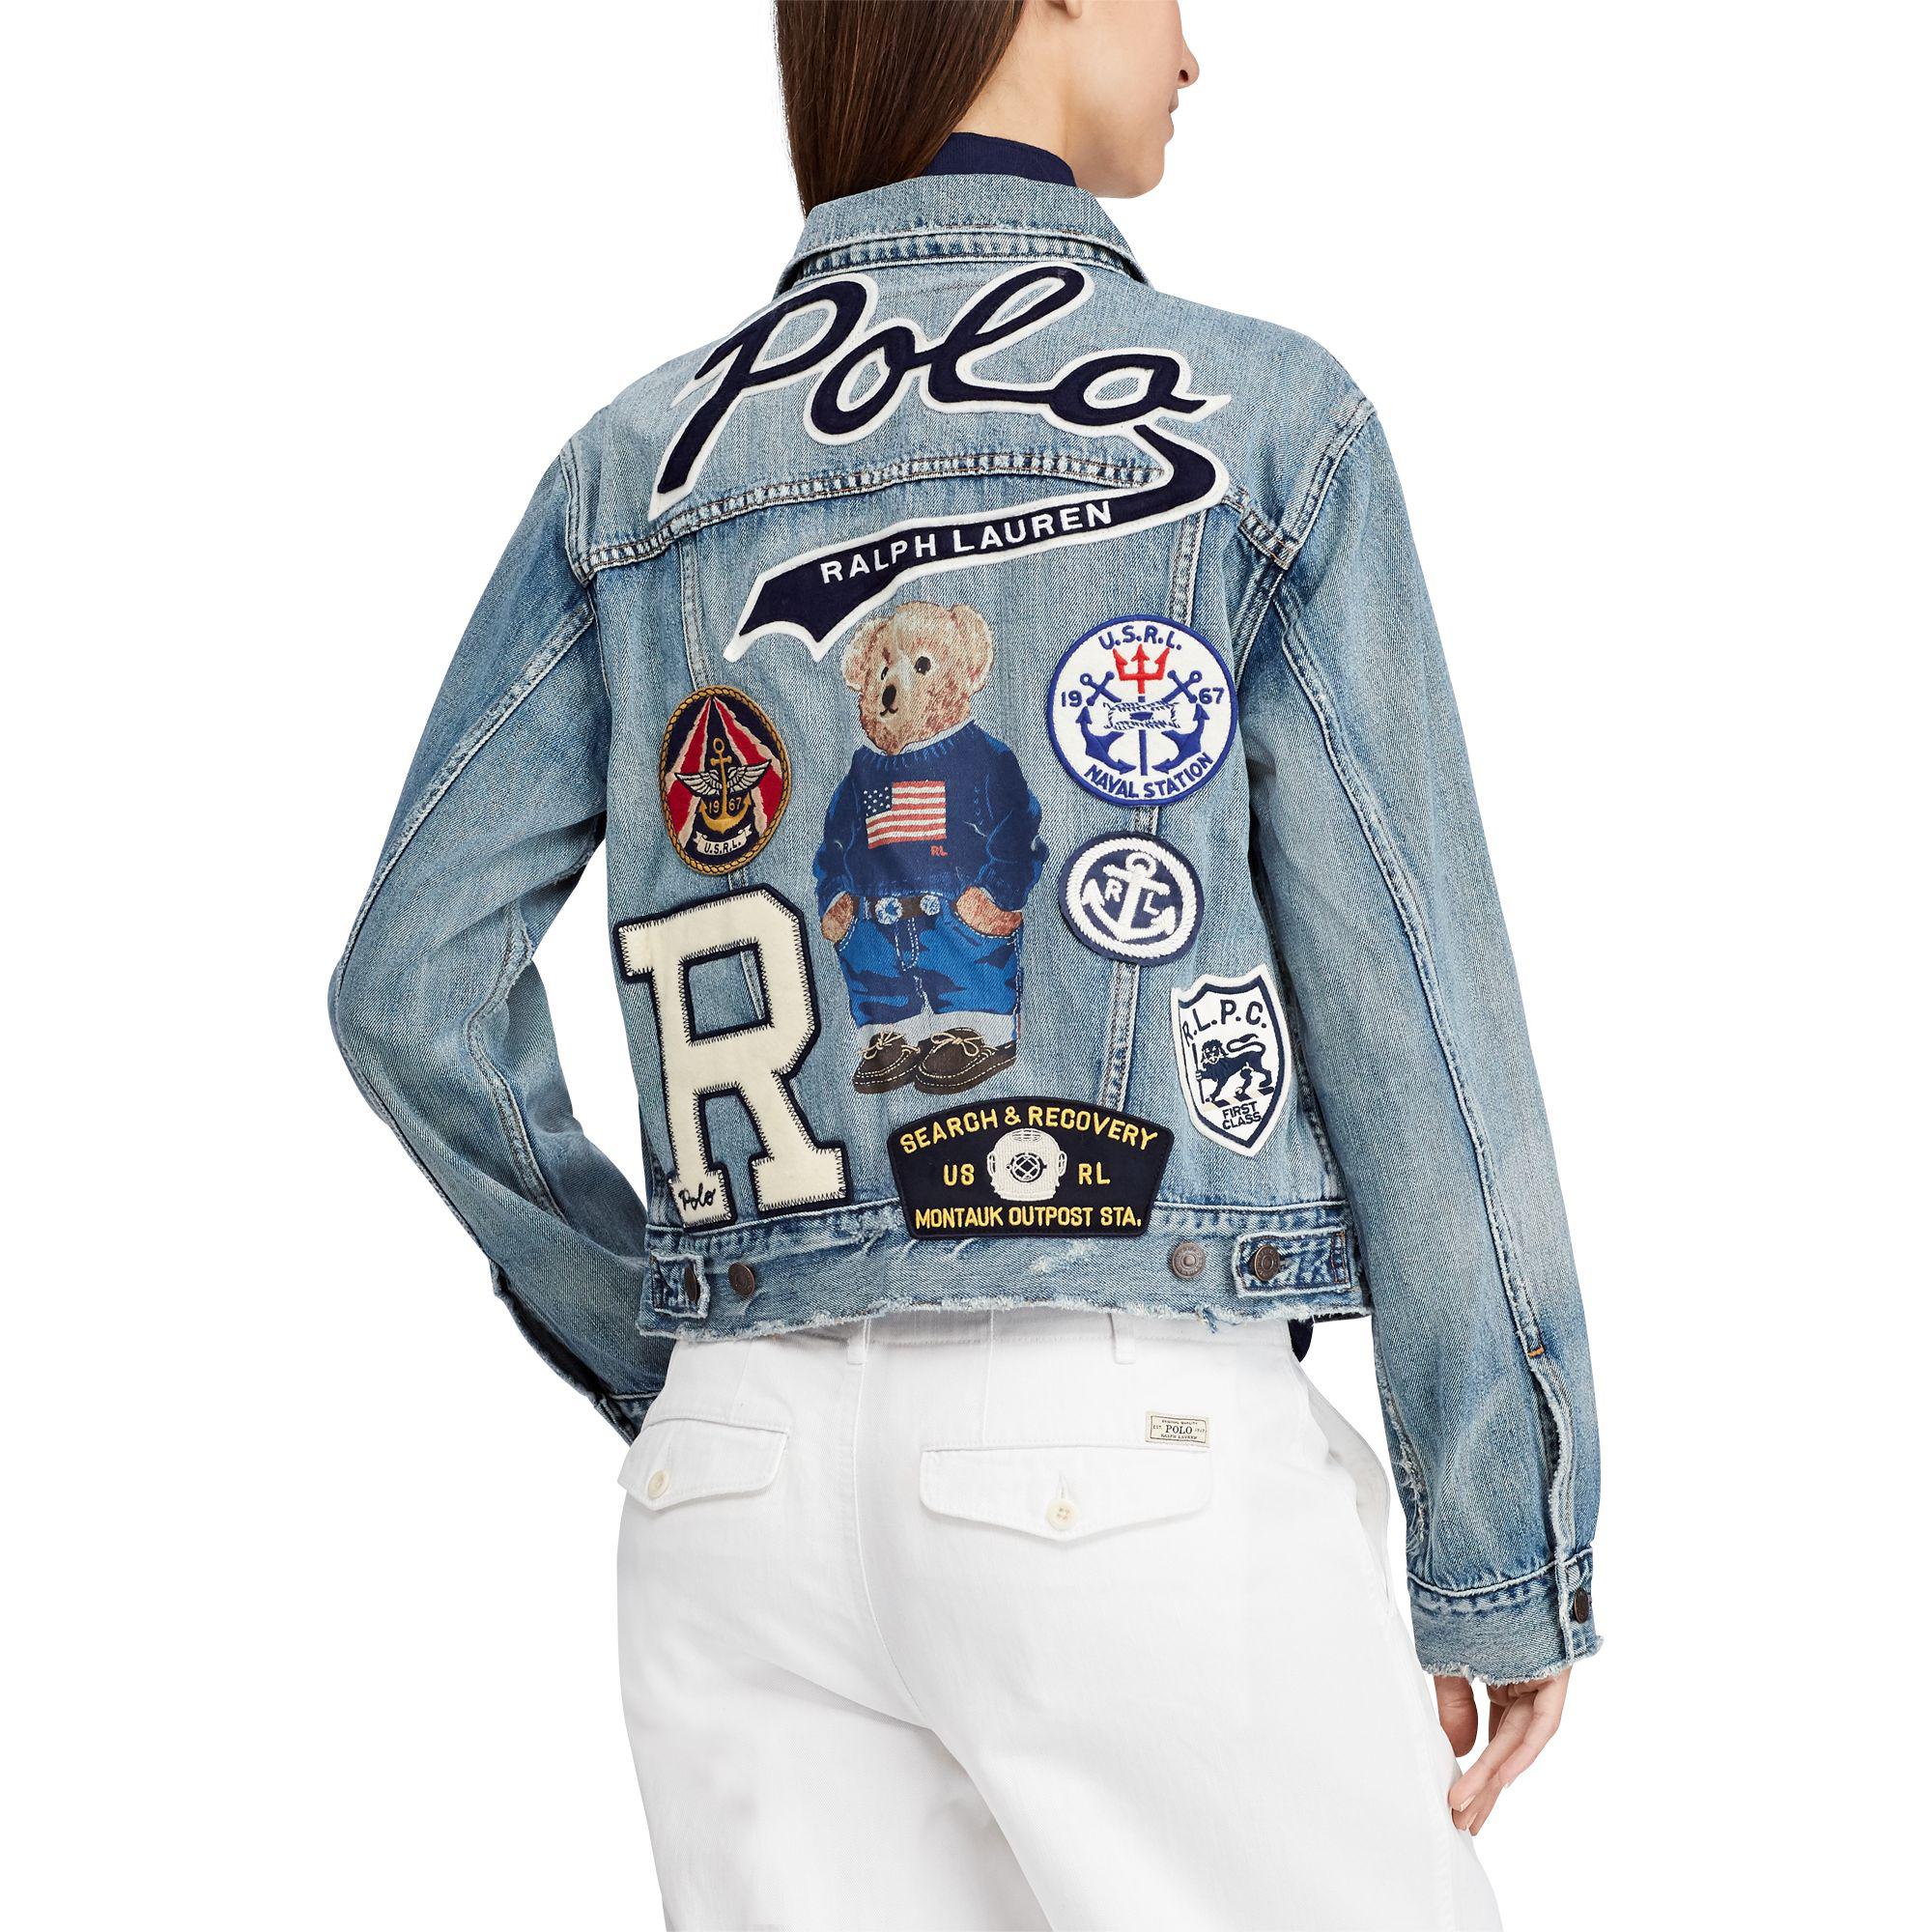 polo denim jacket with patches